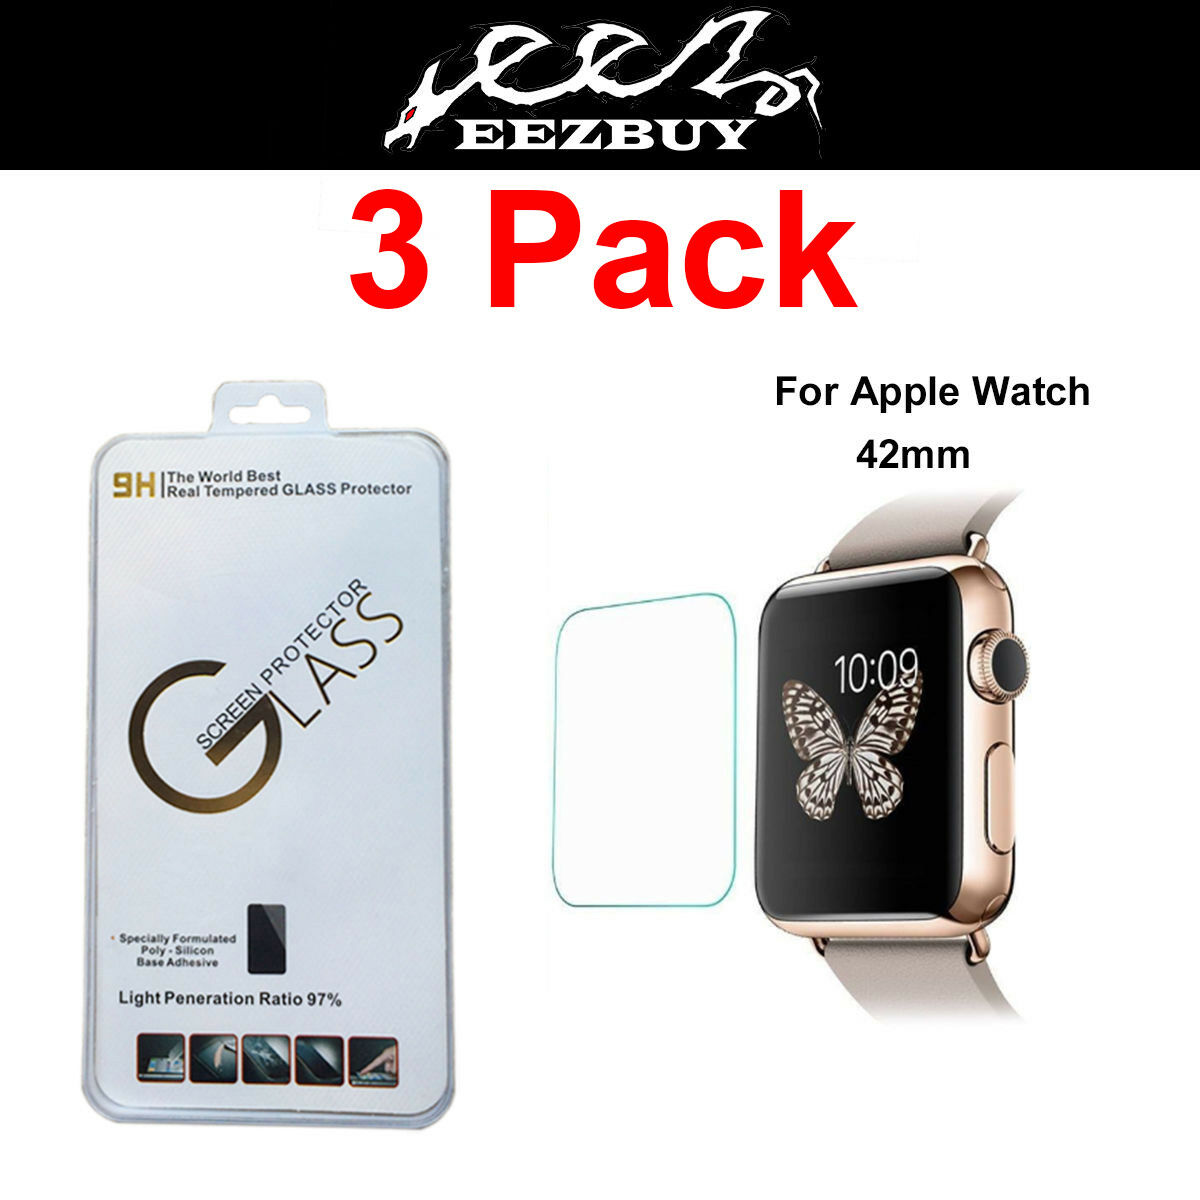 3 Pack Real Tempered Glass Film Screen Protector For Apple Watch Iwatch 42mm